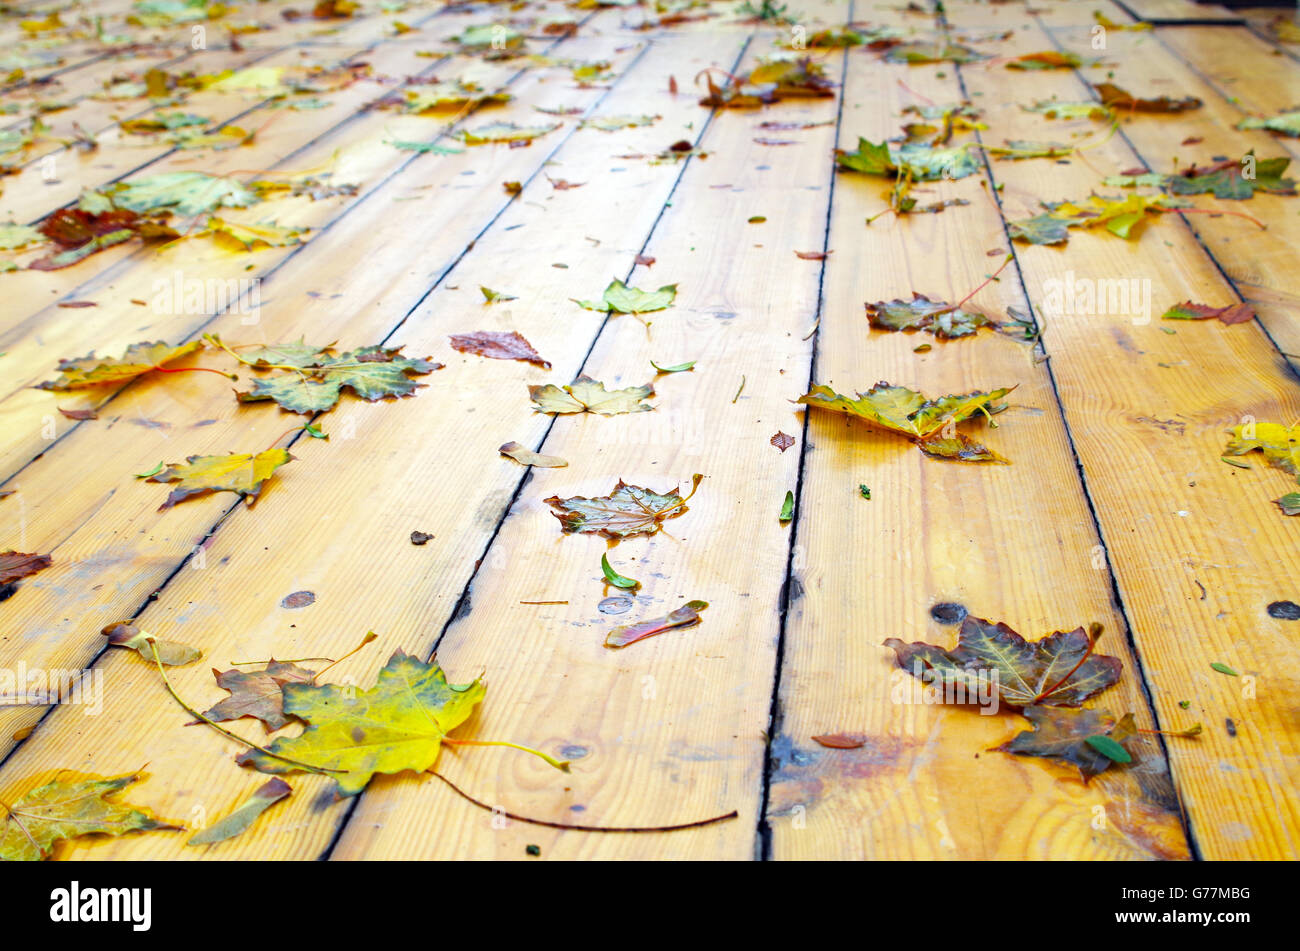 Selective focus on wet fallen autumn maple leaves closeup with shallow depth of focus on the wet wooden platform made of planks Stock Photo